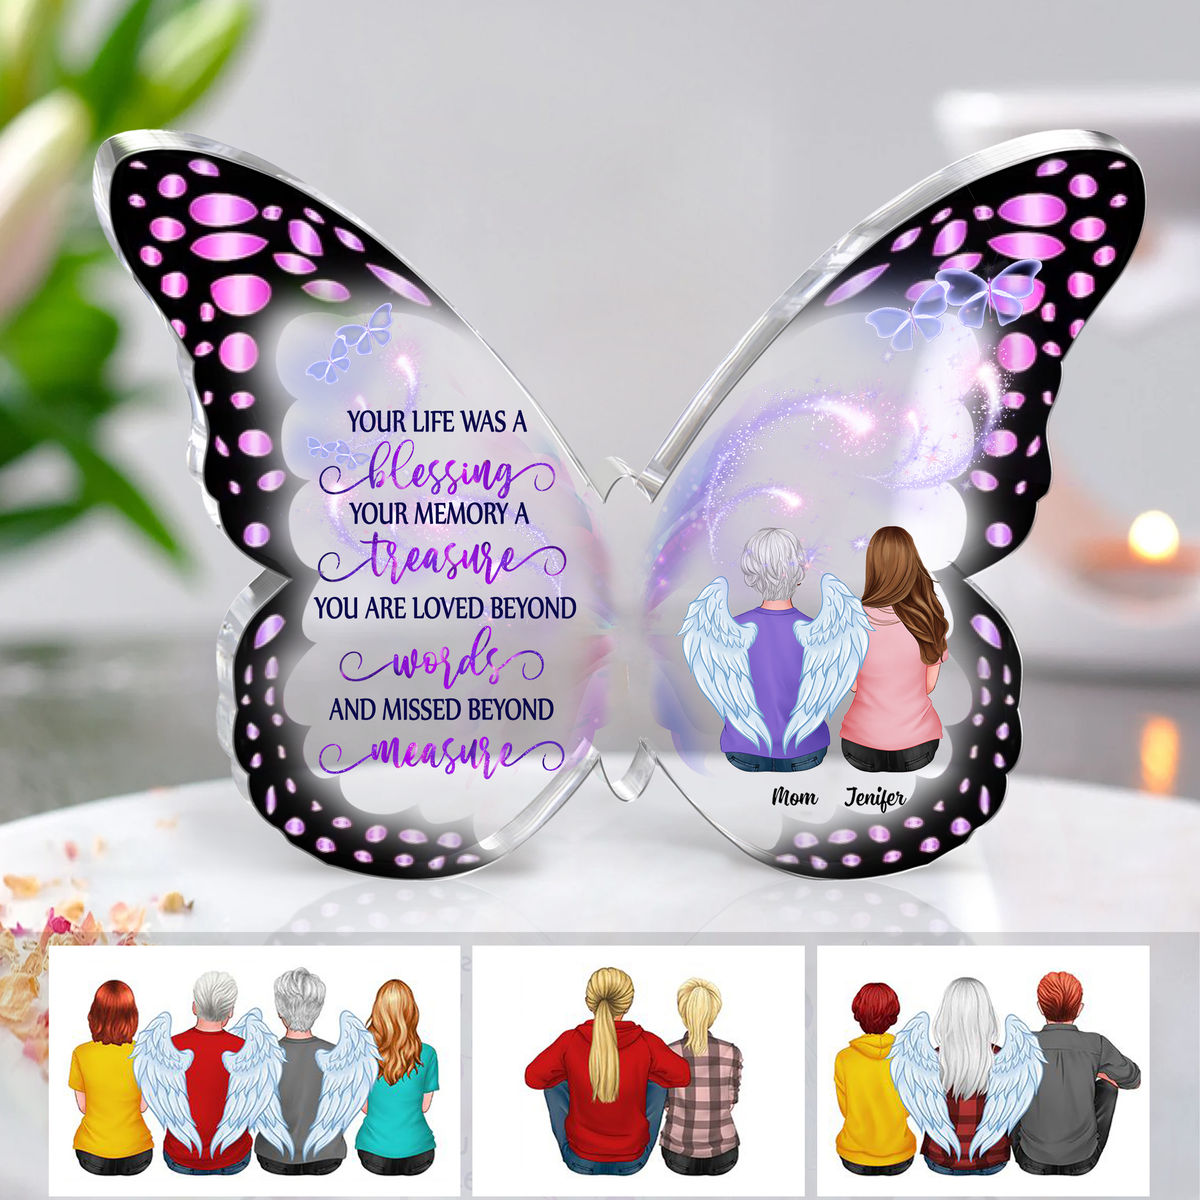 Memorial Family - Your Life Was A Blessing Your Memory A Treasure (Custom Butterfly-Shaped Acrylic Keepsake)